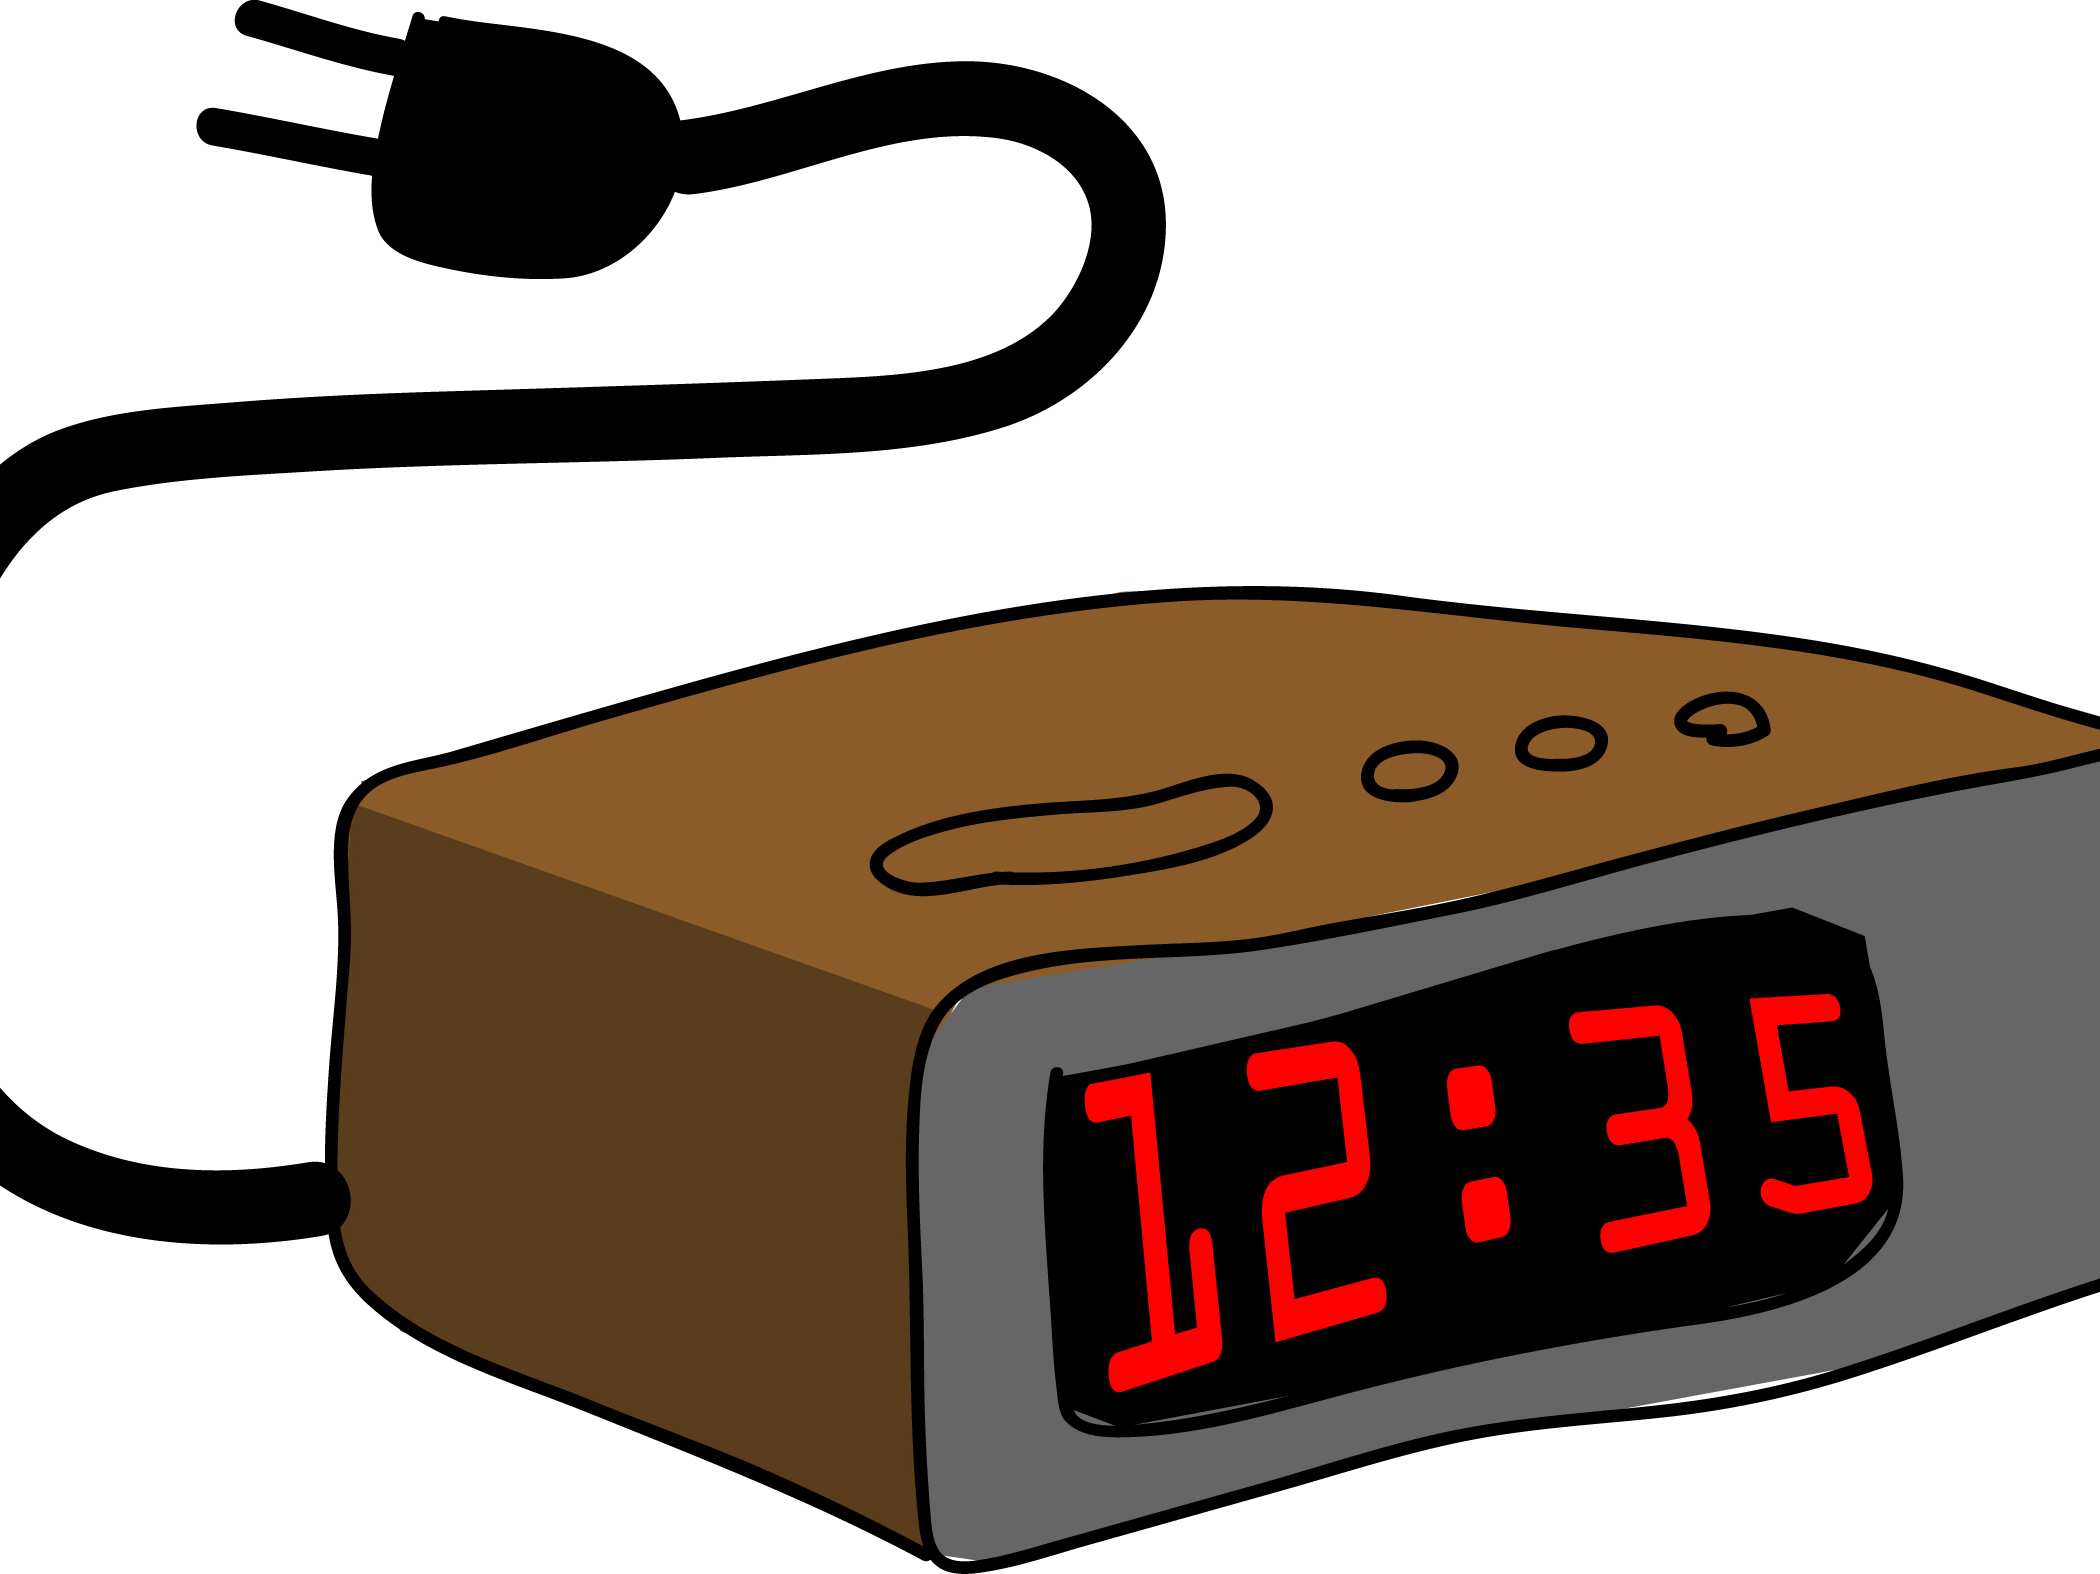 Alarm Clock Drawing at GetDrawings.com | Free for personal use Alarm ...